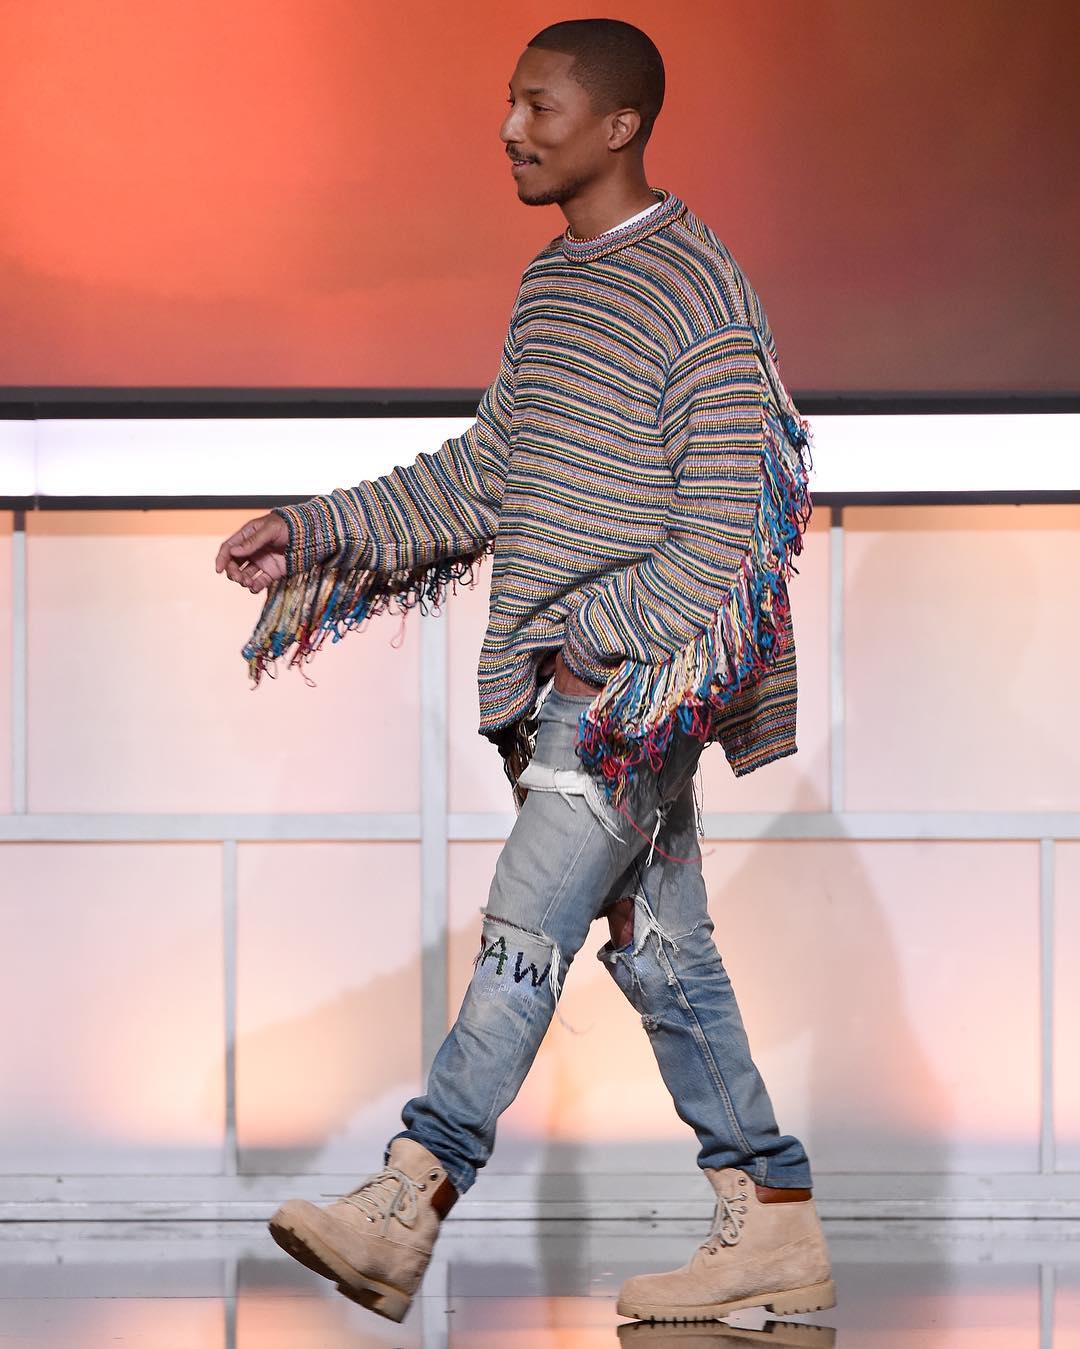 SPOTTED: Pharrell Williams In Stella McCartney Sweater And Timberland Boots